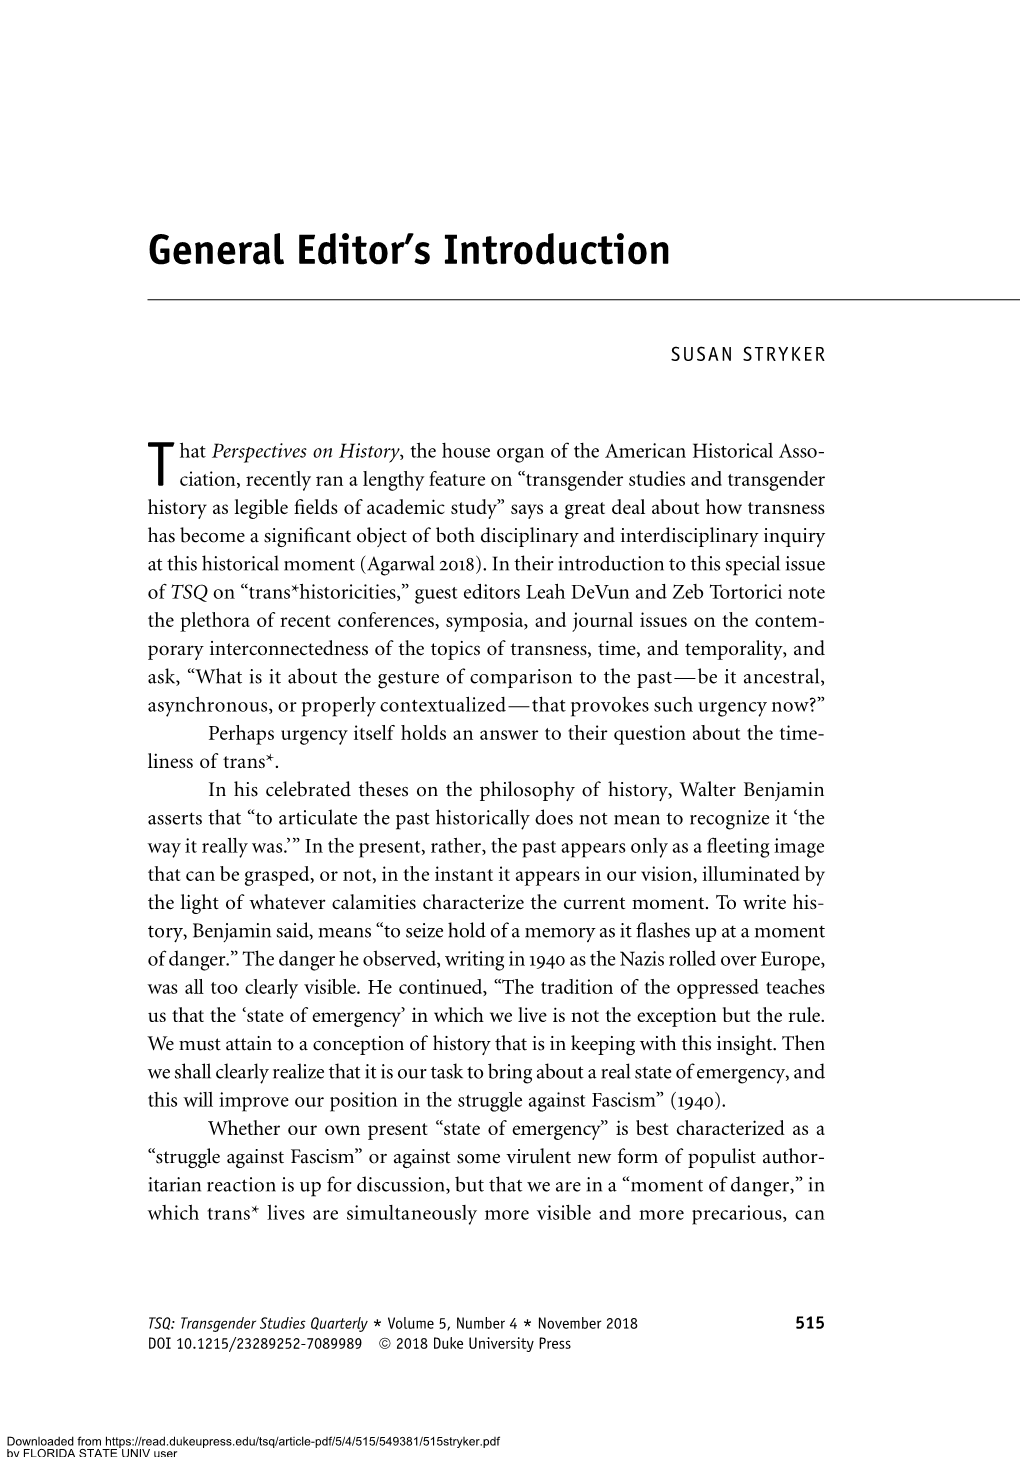 General Editor's Introduction